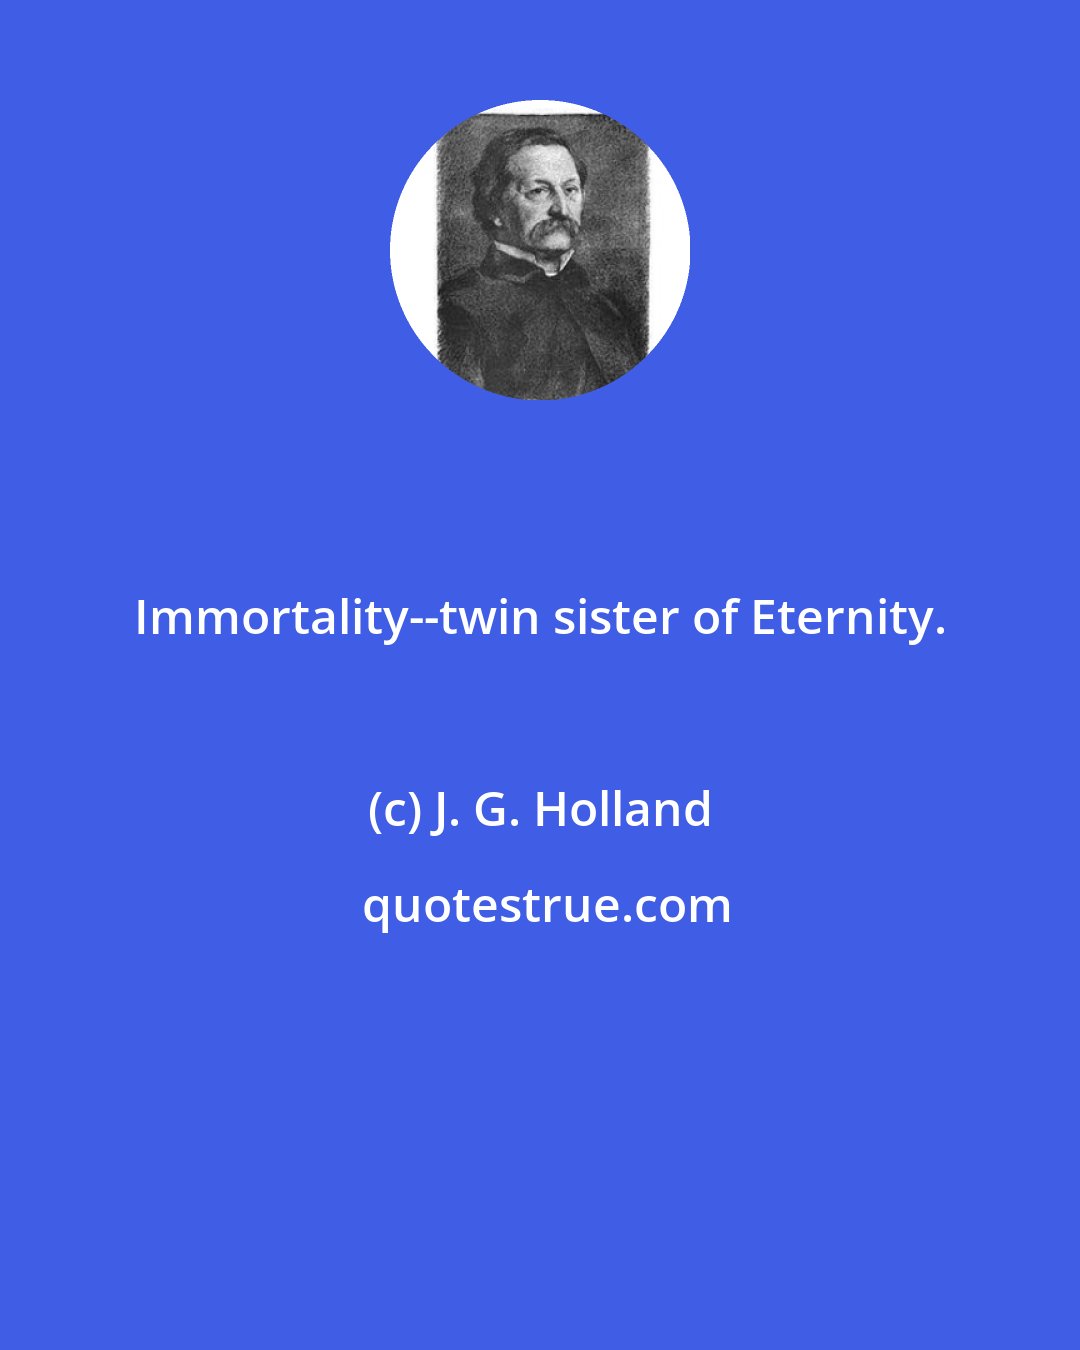 J. G. Holland: Immortality--twin sister of Eternity.